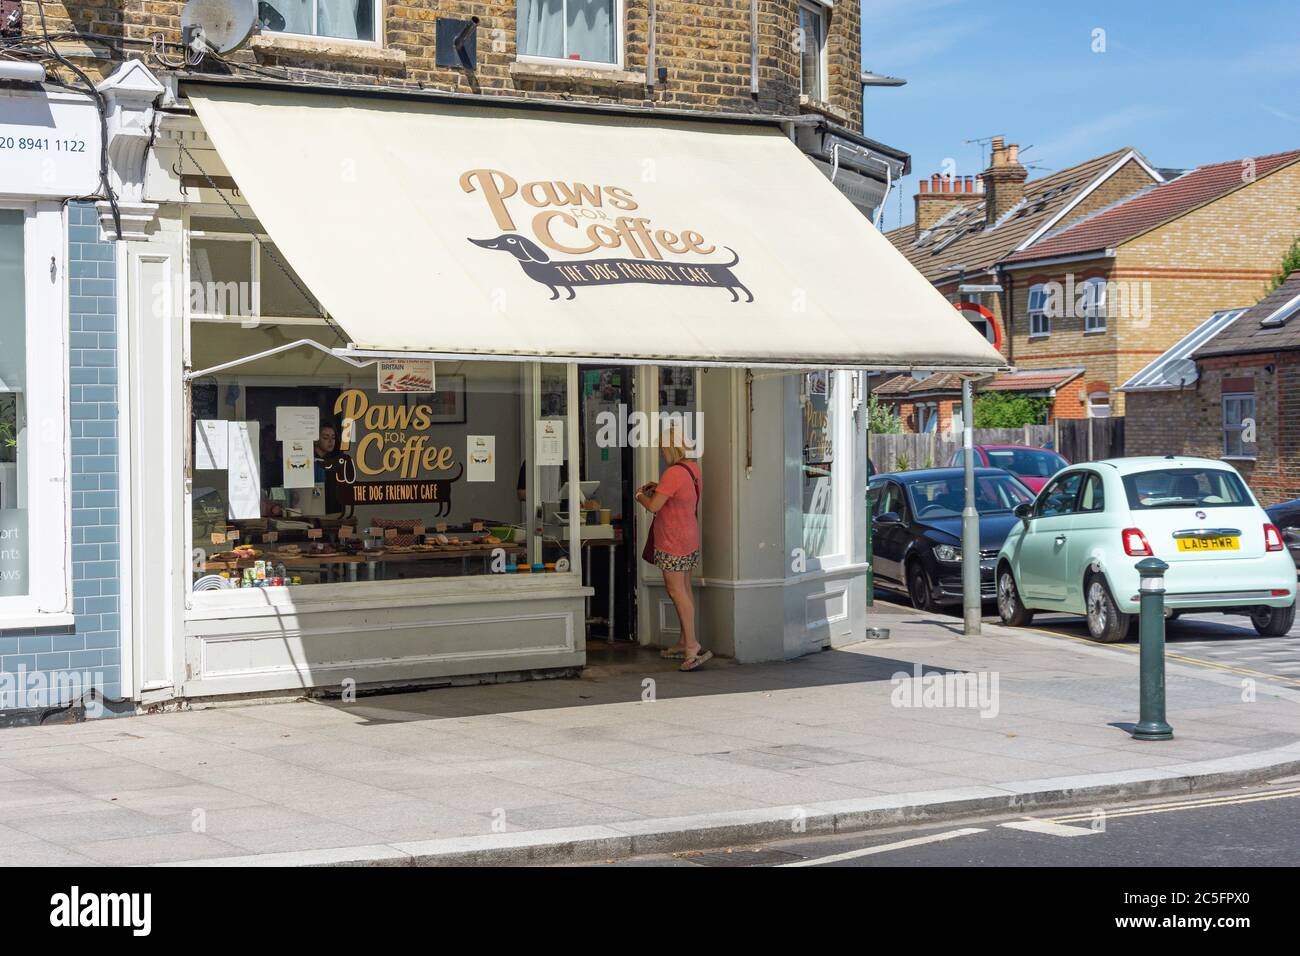 'Paws for coffee' cafe, High Street, Hampton Hill, Borough of Richmond-upon-Thames, Greater London, England, United Kingdom Stock Photo